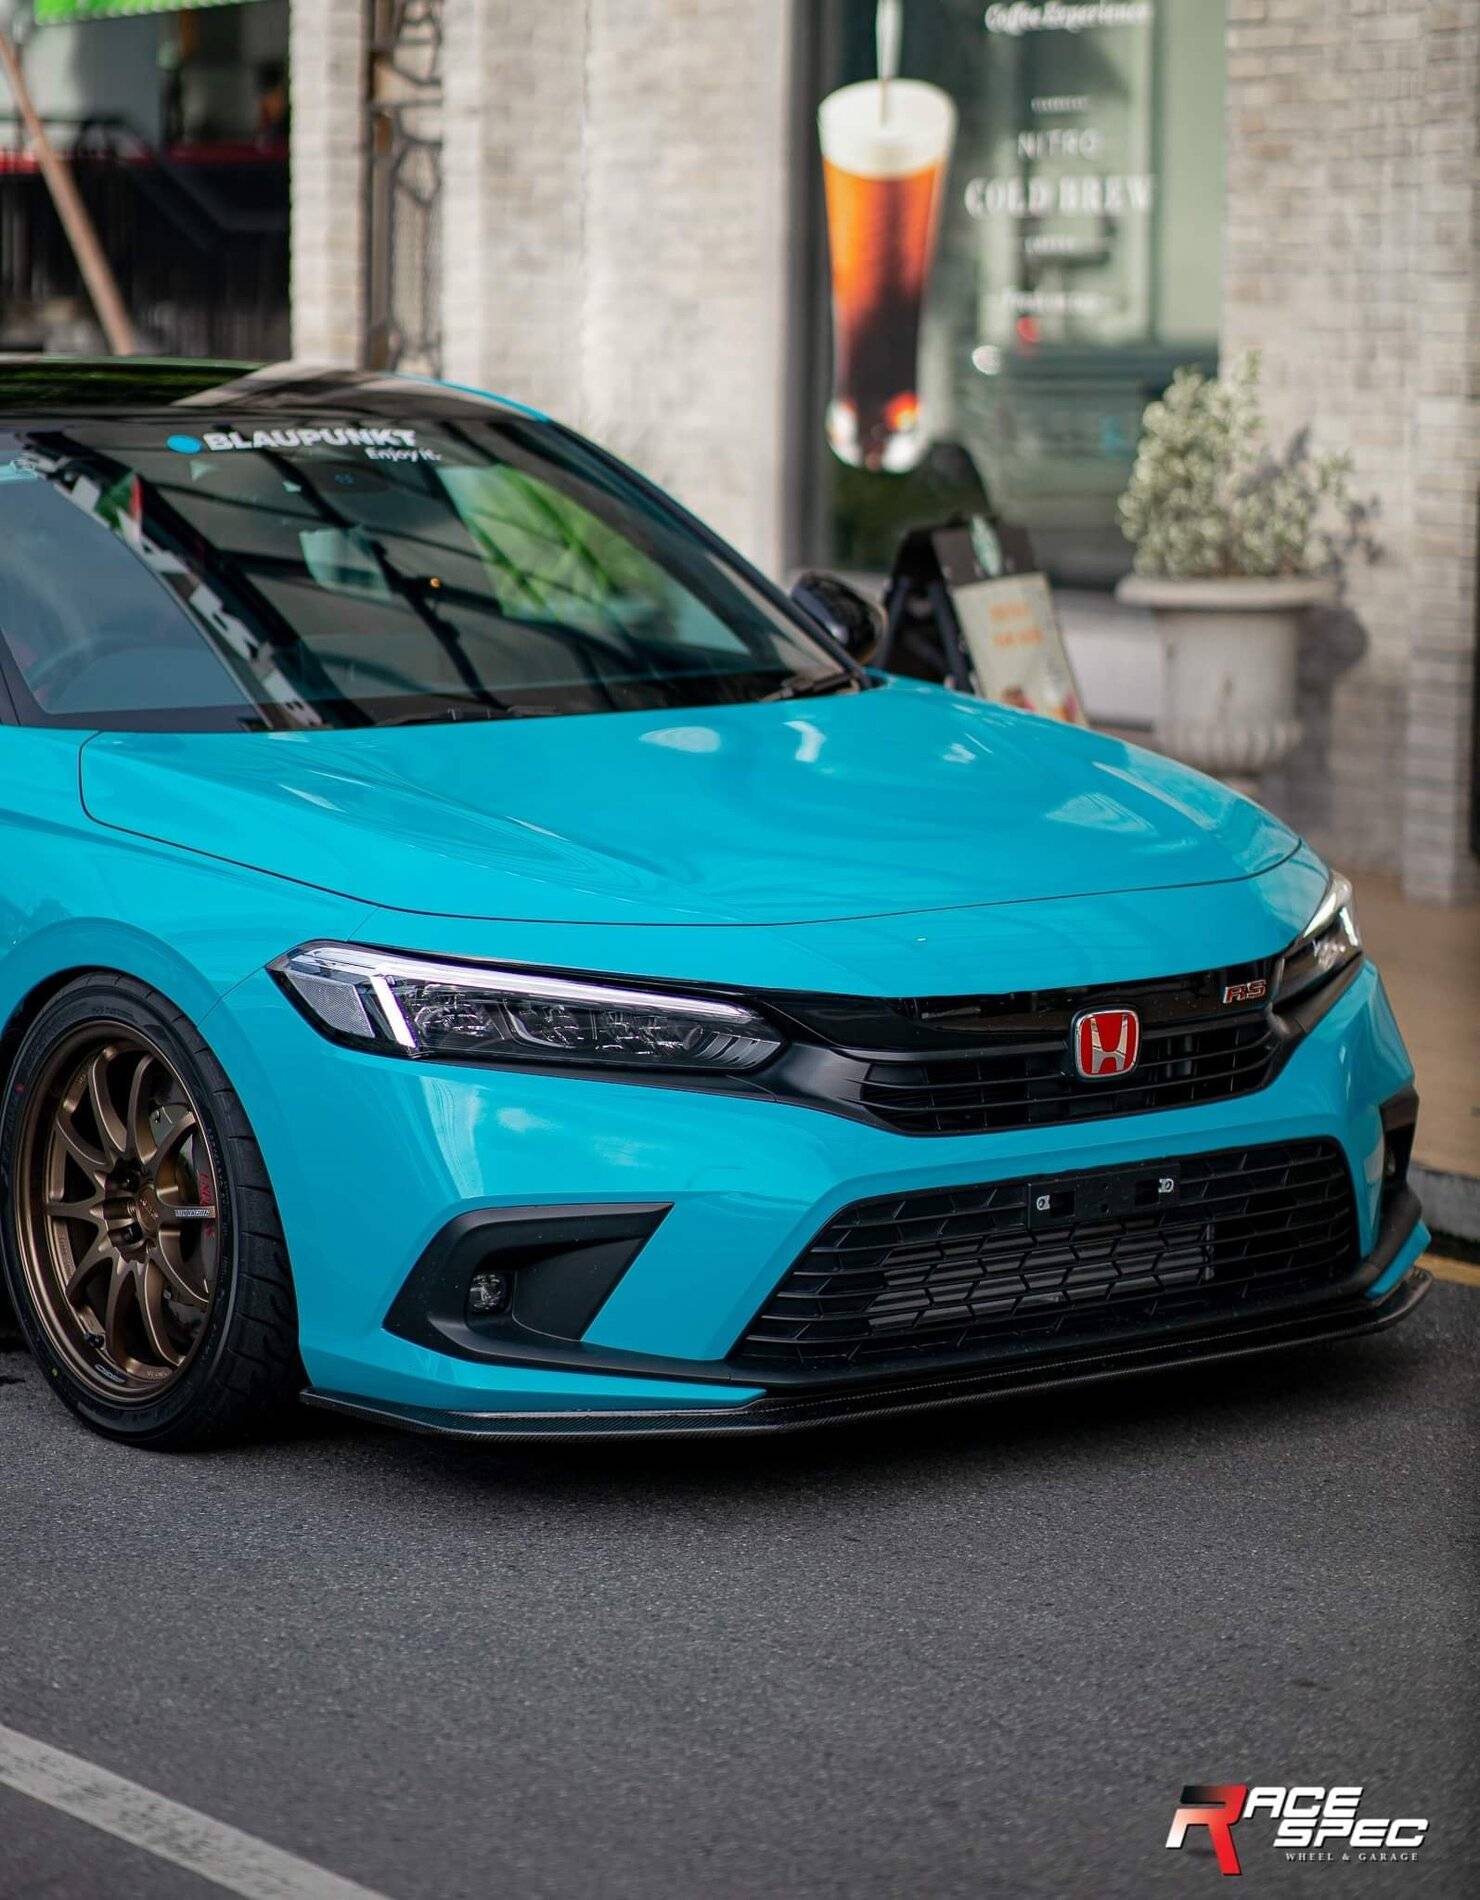 2022 Civic RS Sedan with wrap and front bumper nose blackout CivicXI